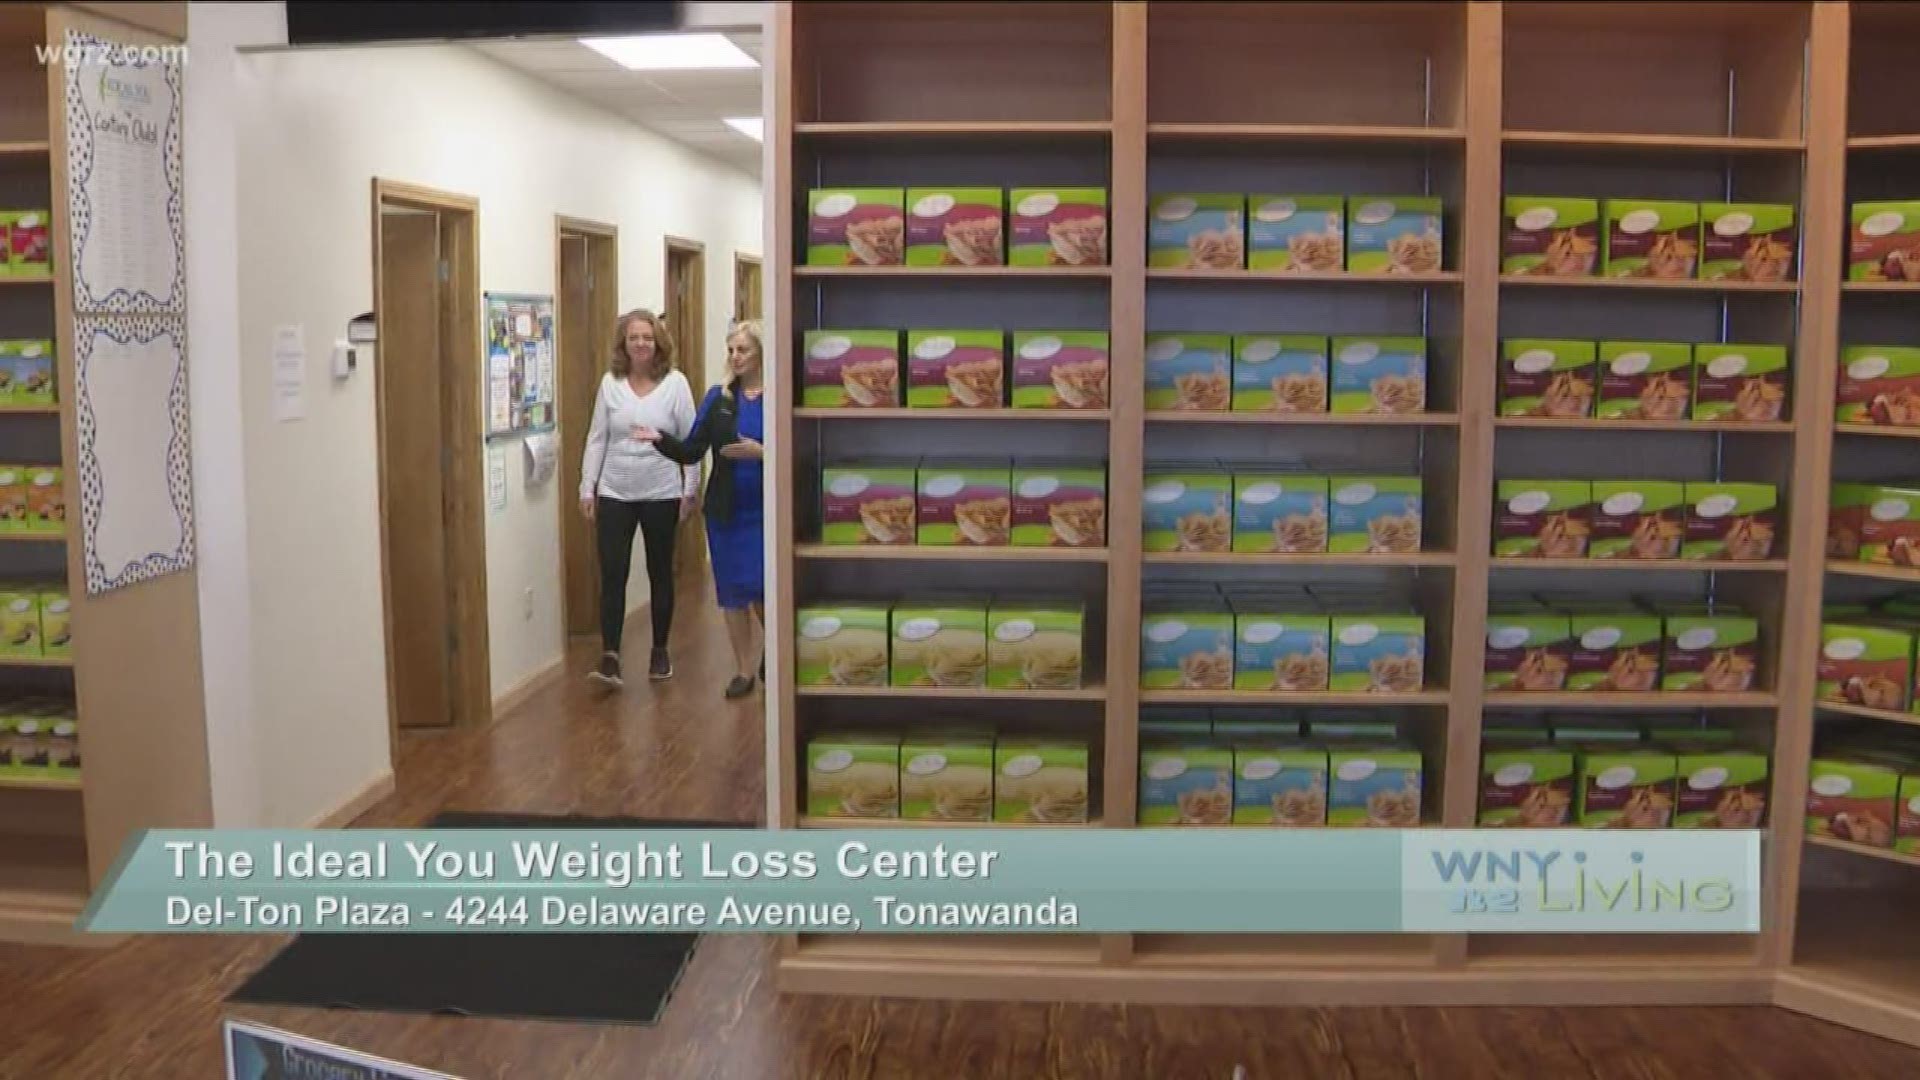 December 14 - The Ideal You Weight Loss Center (THIS VIDEO IS SPONSORED BY THE IDEAL YOU WEIGHT LOSS CENTER)